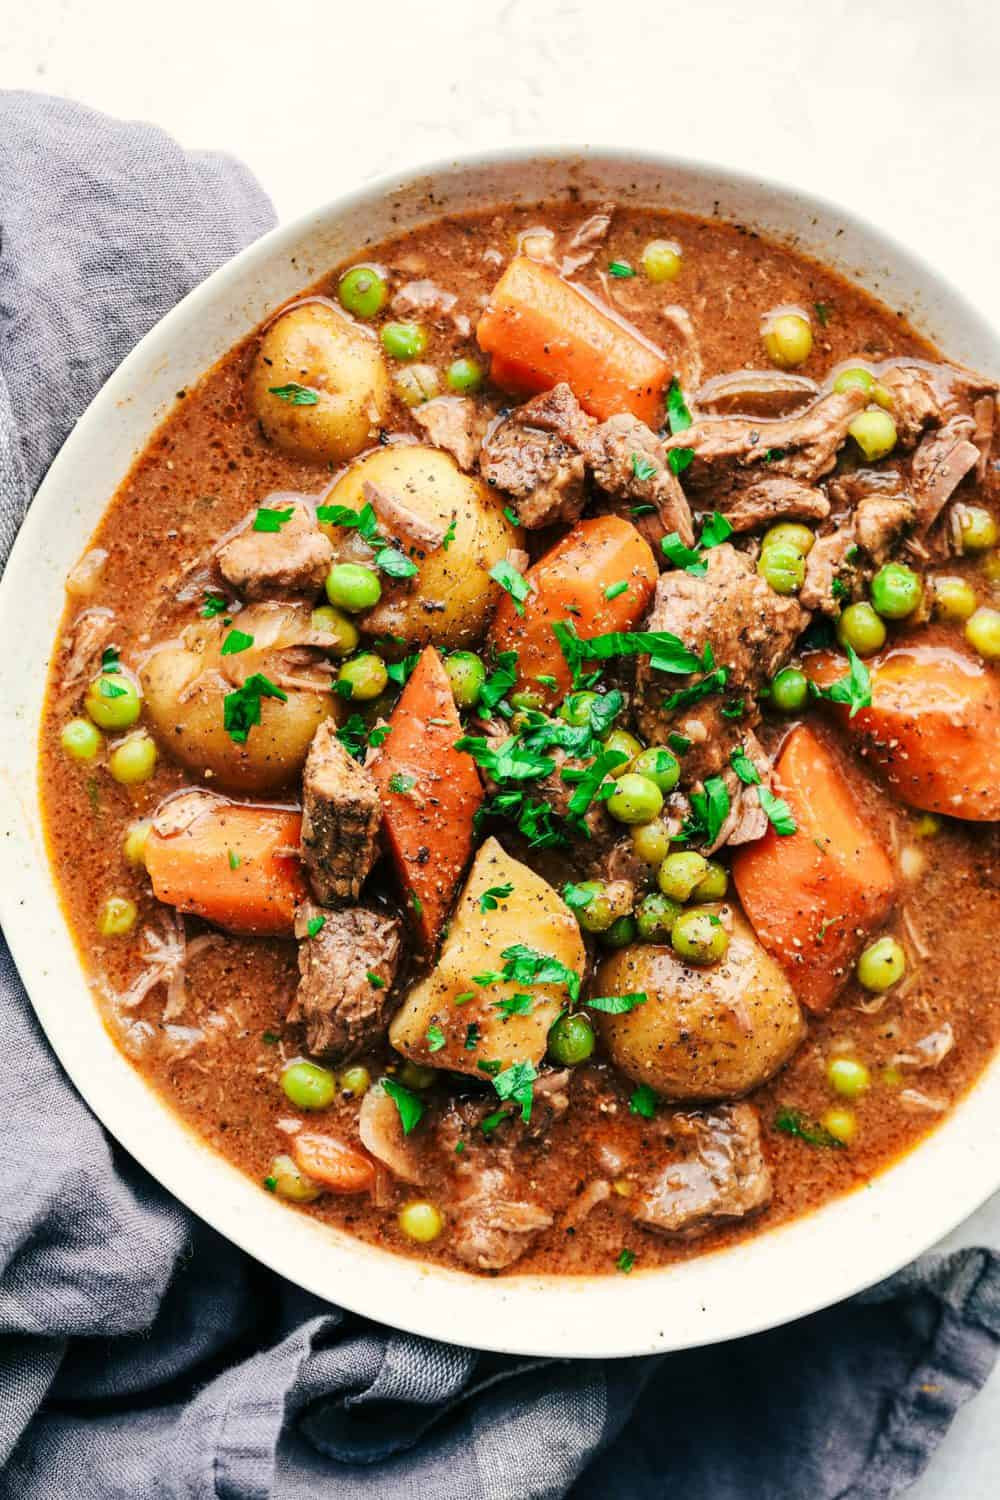 Recipes For Beef Stew
 Best Ever Slow Cooker Beef Stew